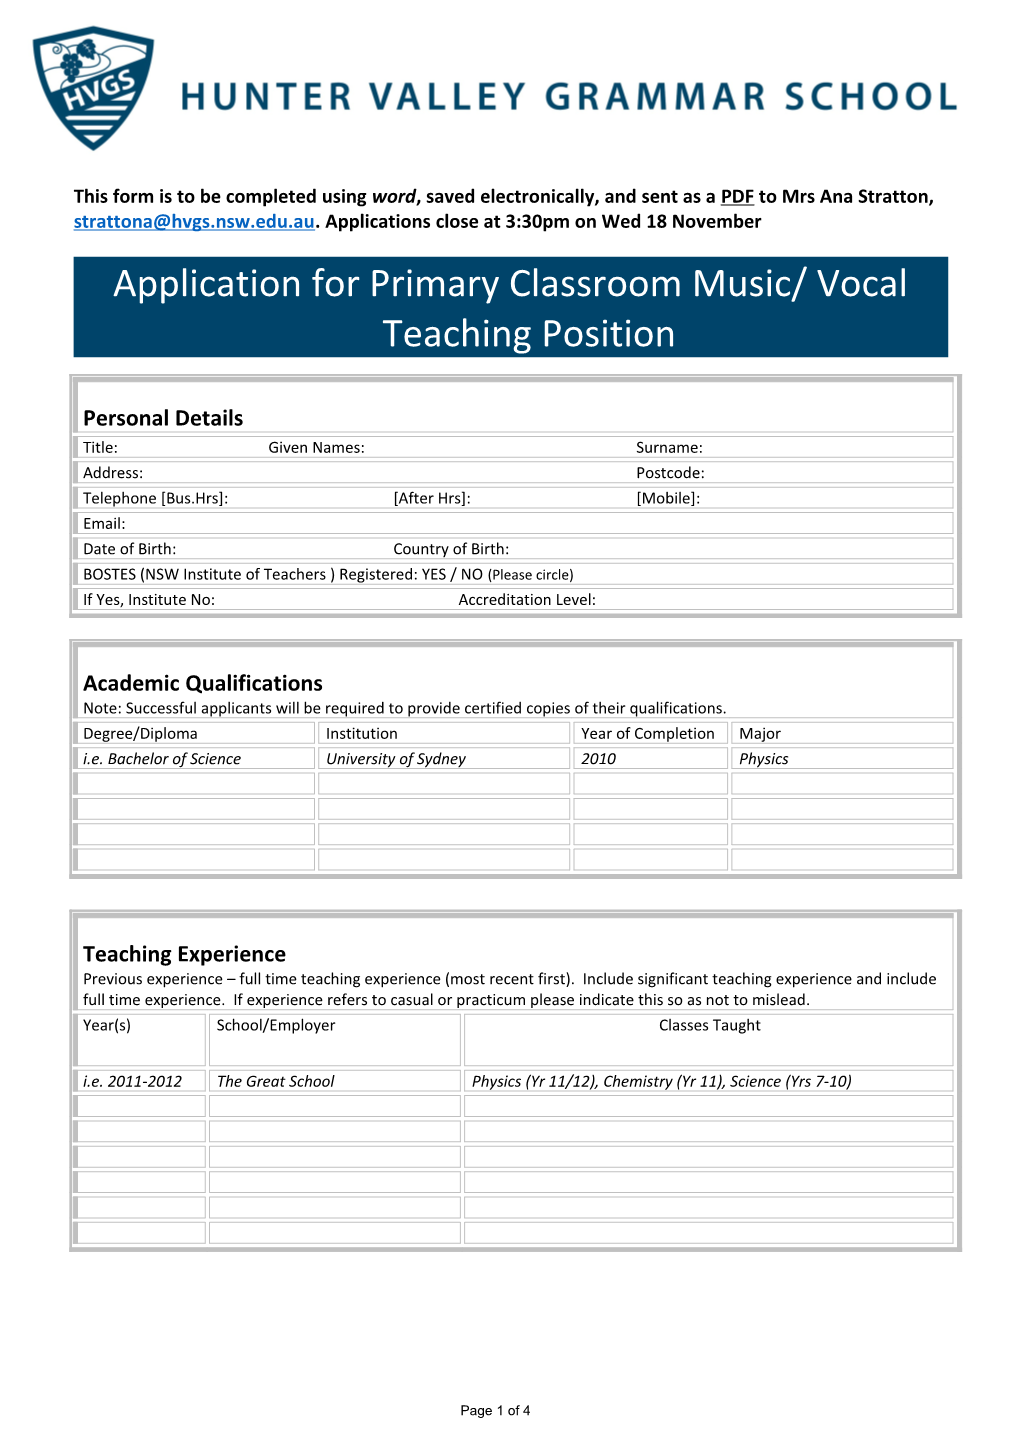 This Form Should Be Completed and Returned Along with Your Application And